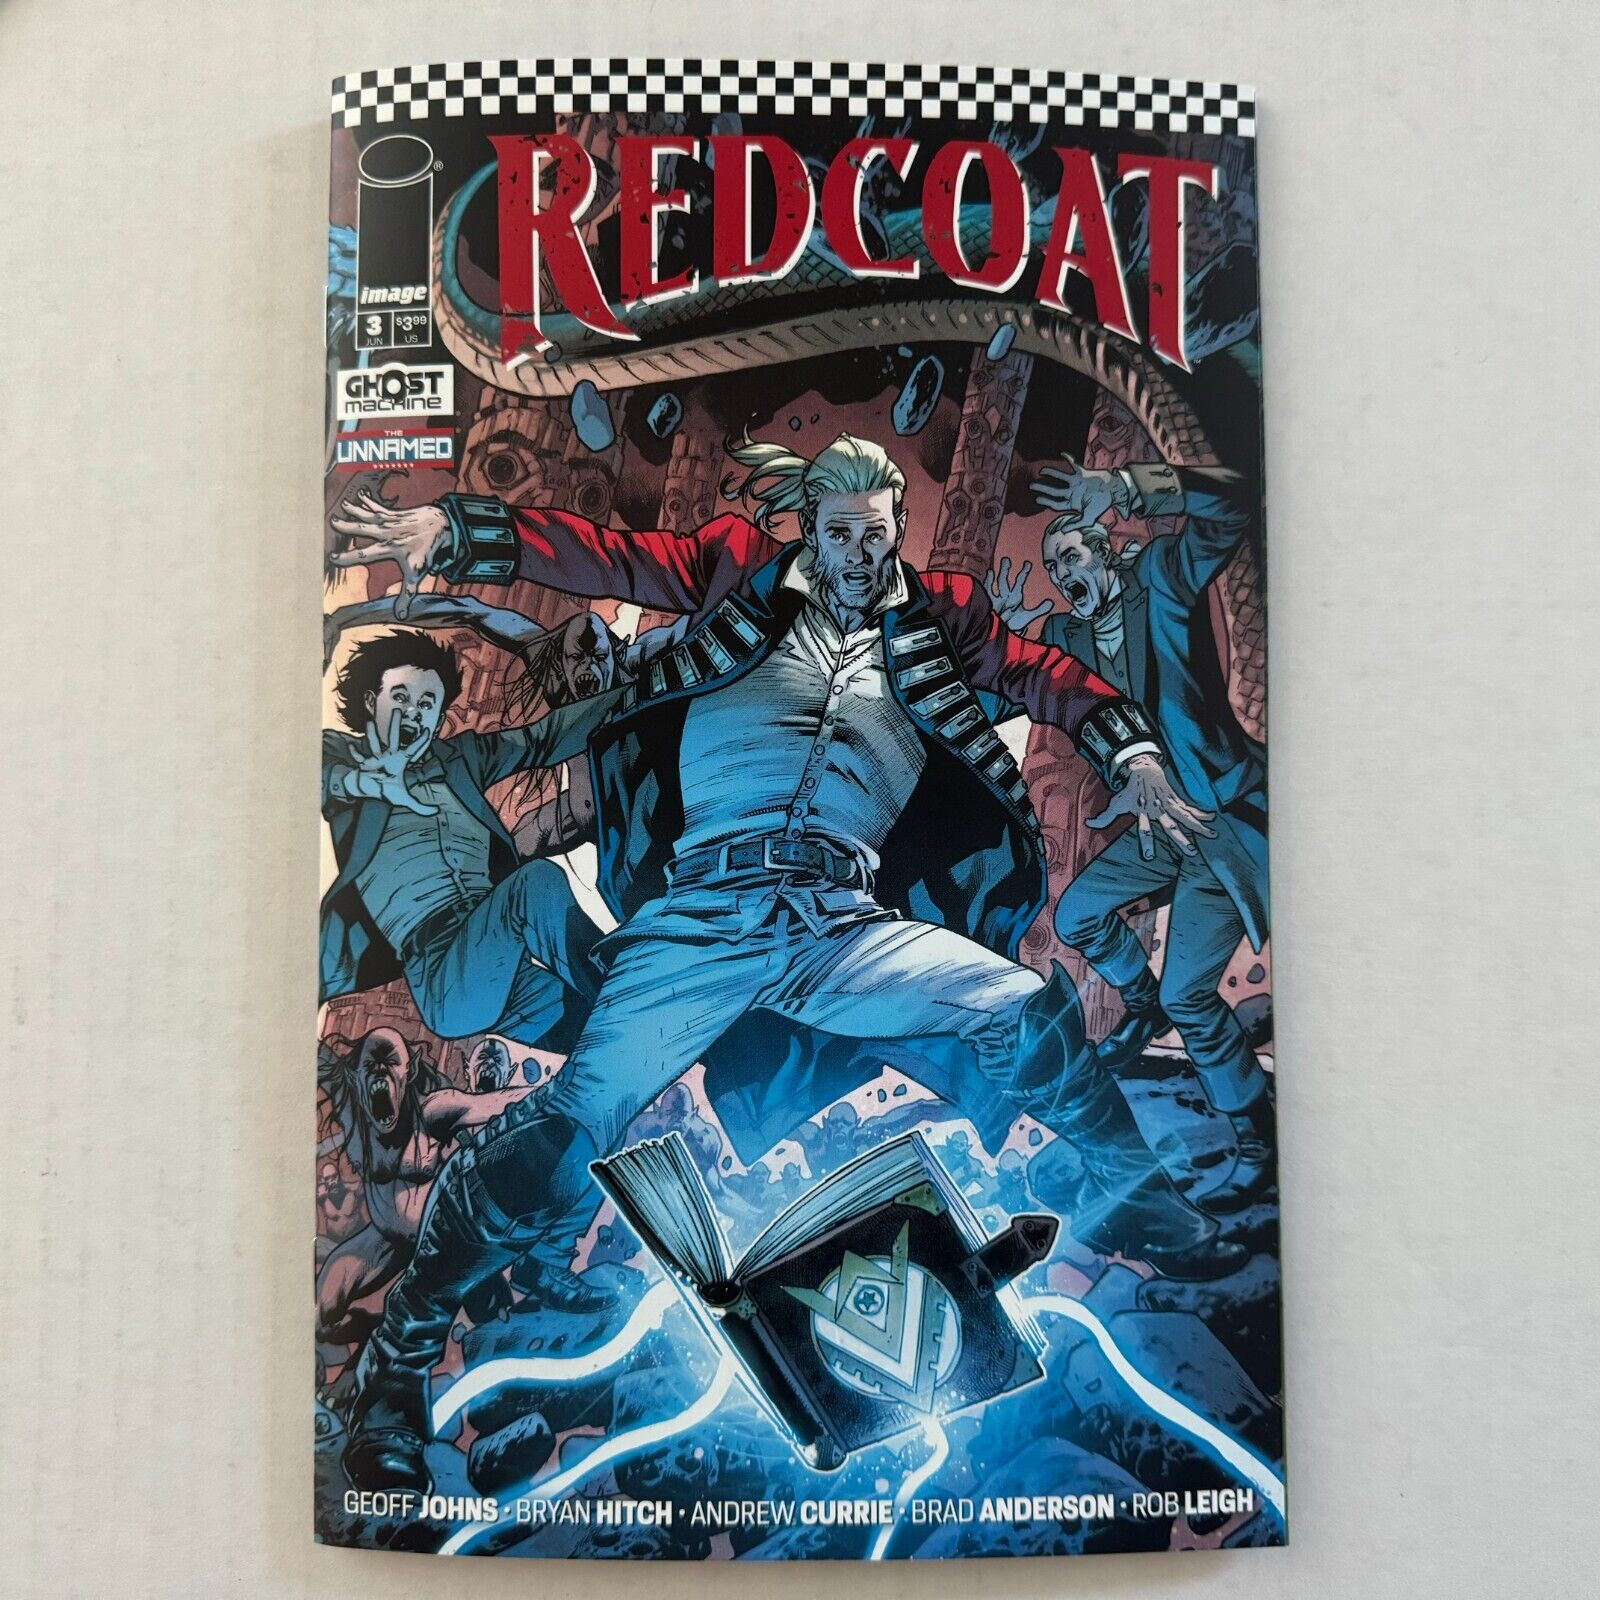 Redcoat #3 First Print Cover A Image Comics 2024 Geoff Johns Bryan Hitch